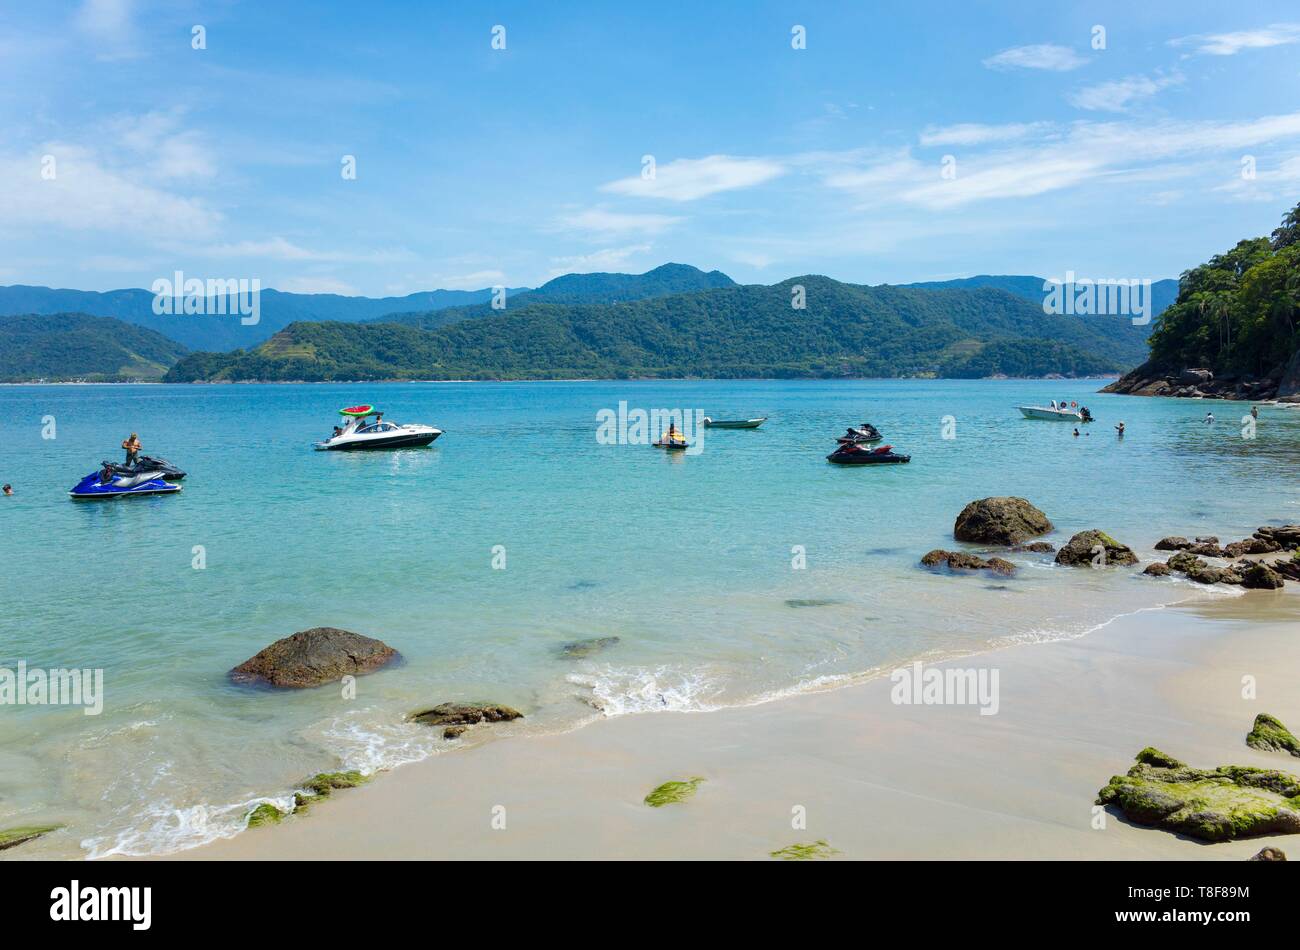 Brazil, Sao Paulo State, Litoral Norte, Barra do Sahy, As Ilhas islands a few minutes boat from the shore have a desert island twist Stock Photo